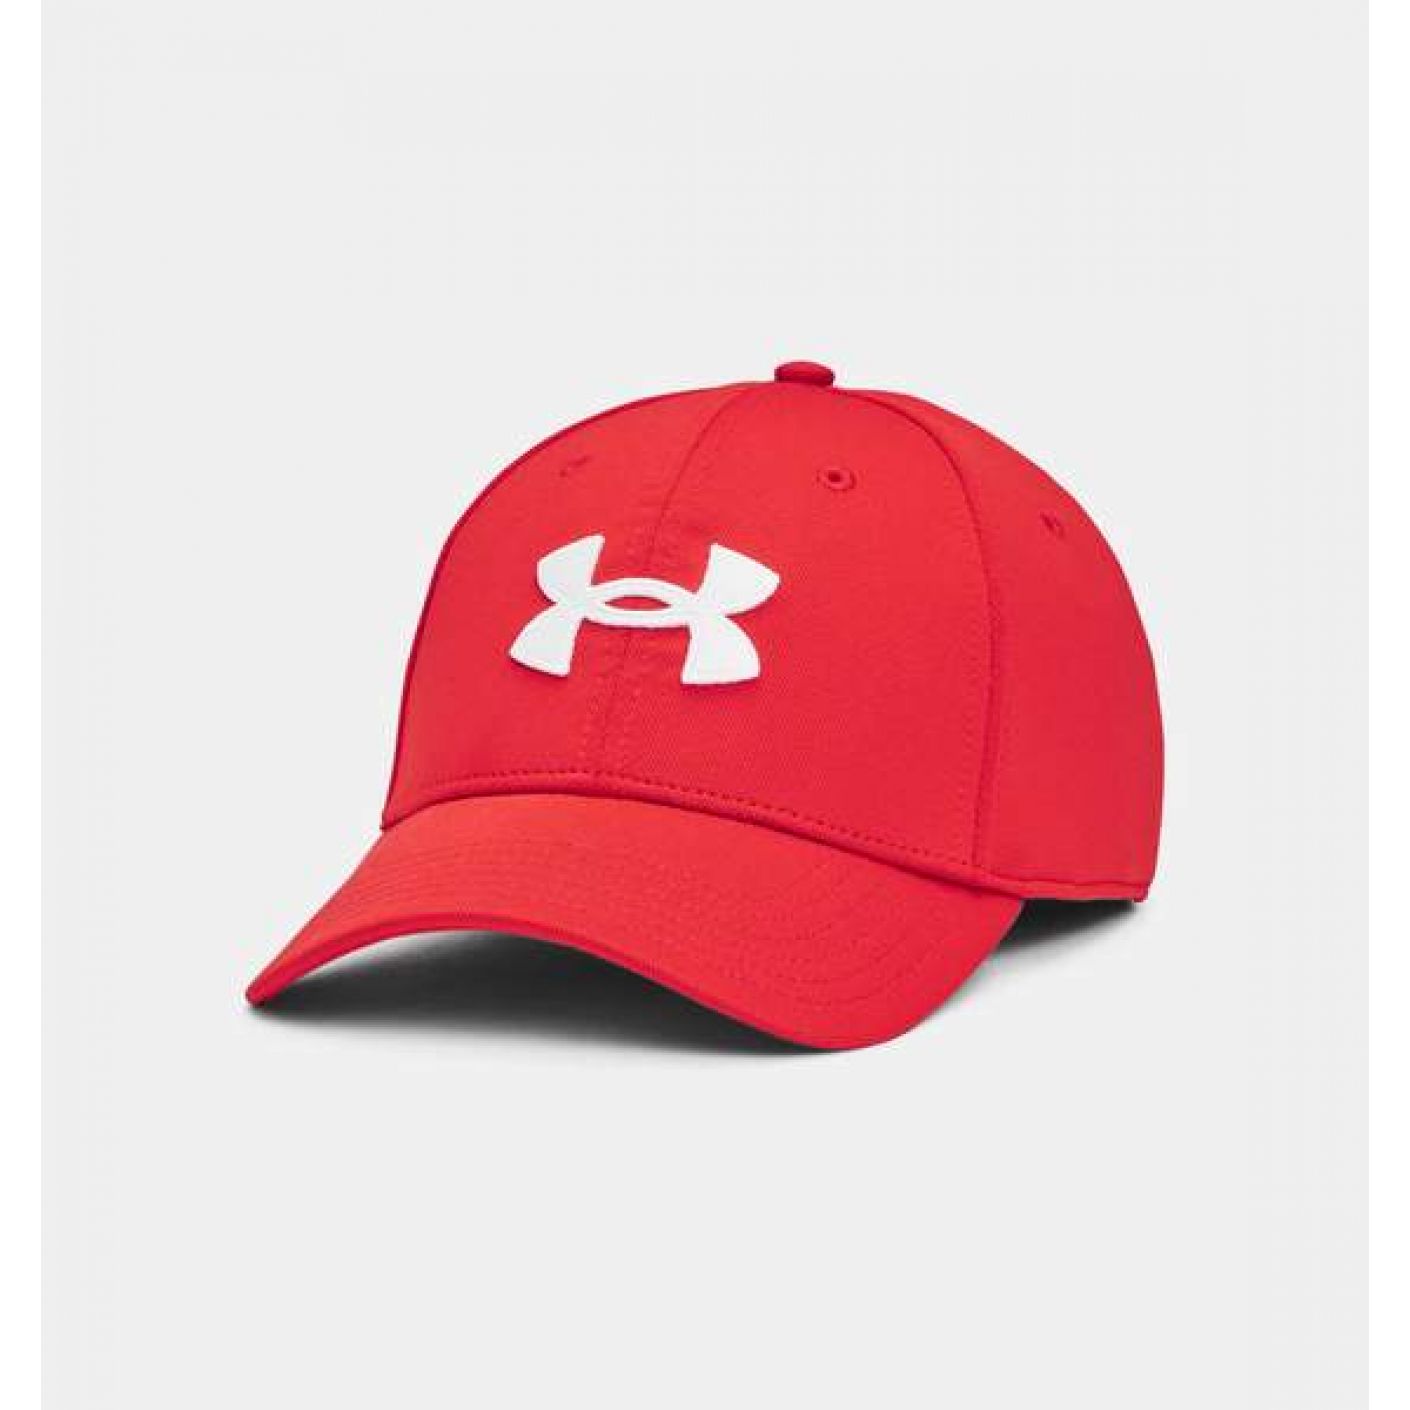 Under Armour UA Blitzing Red